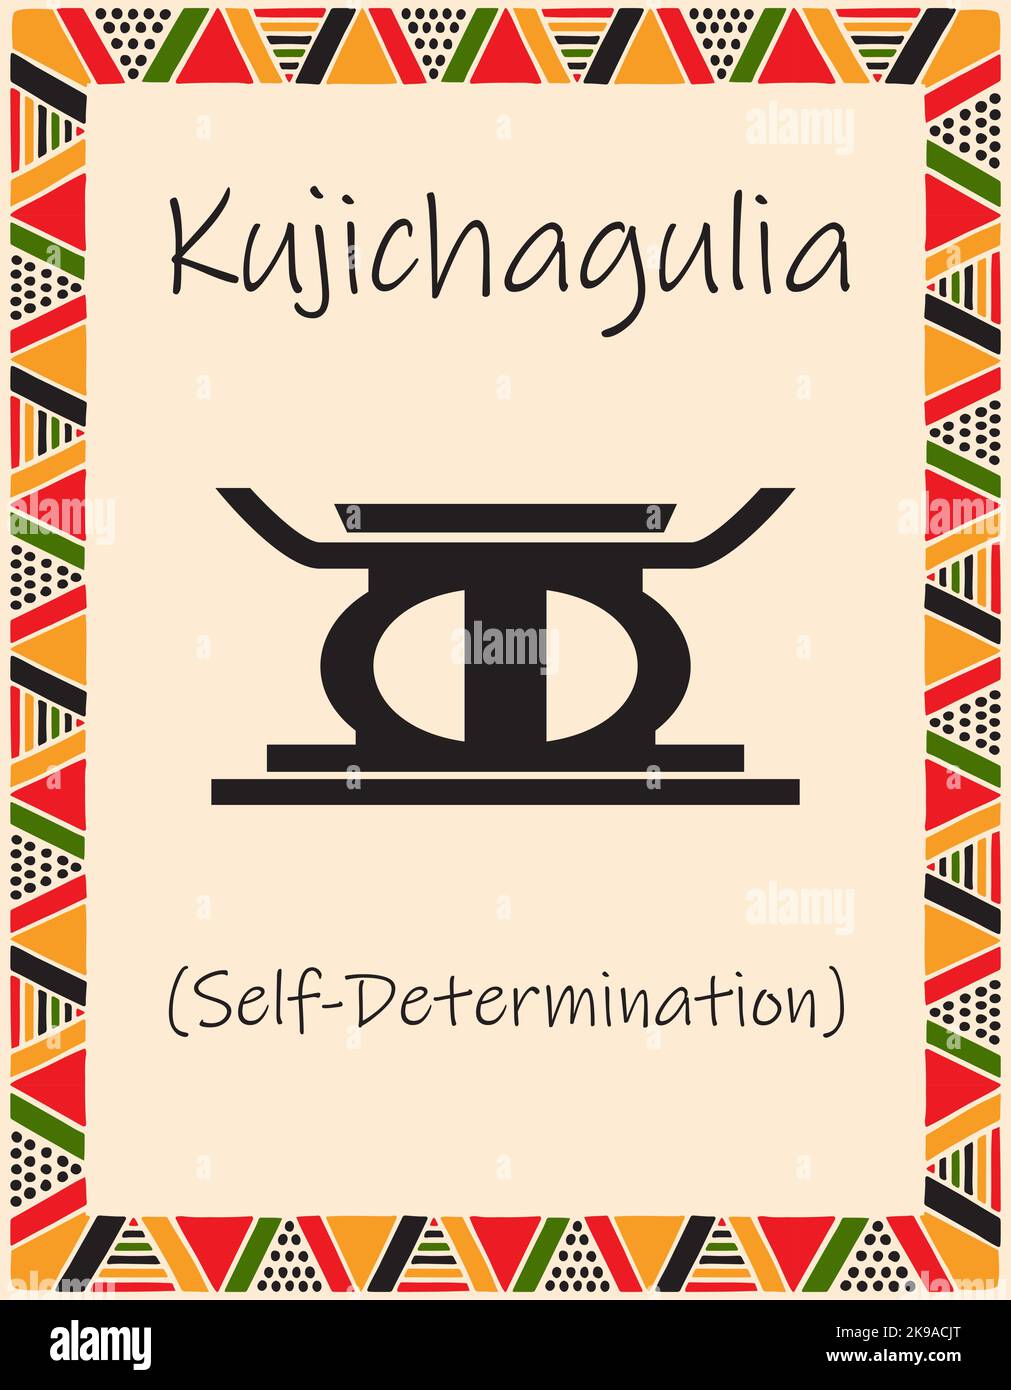 A card with one of the Kwanzaa principles. Symbol Kujichagulia means Self-determination in Swahili. Poster with an ethnic African pattern in tradition Stock Vector